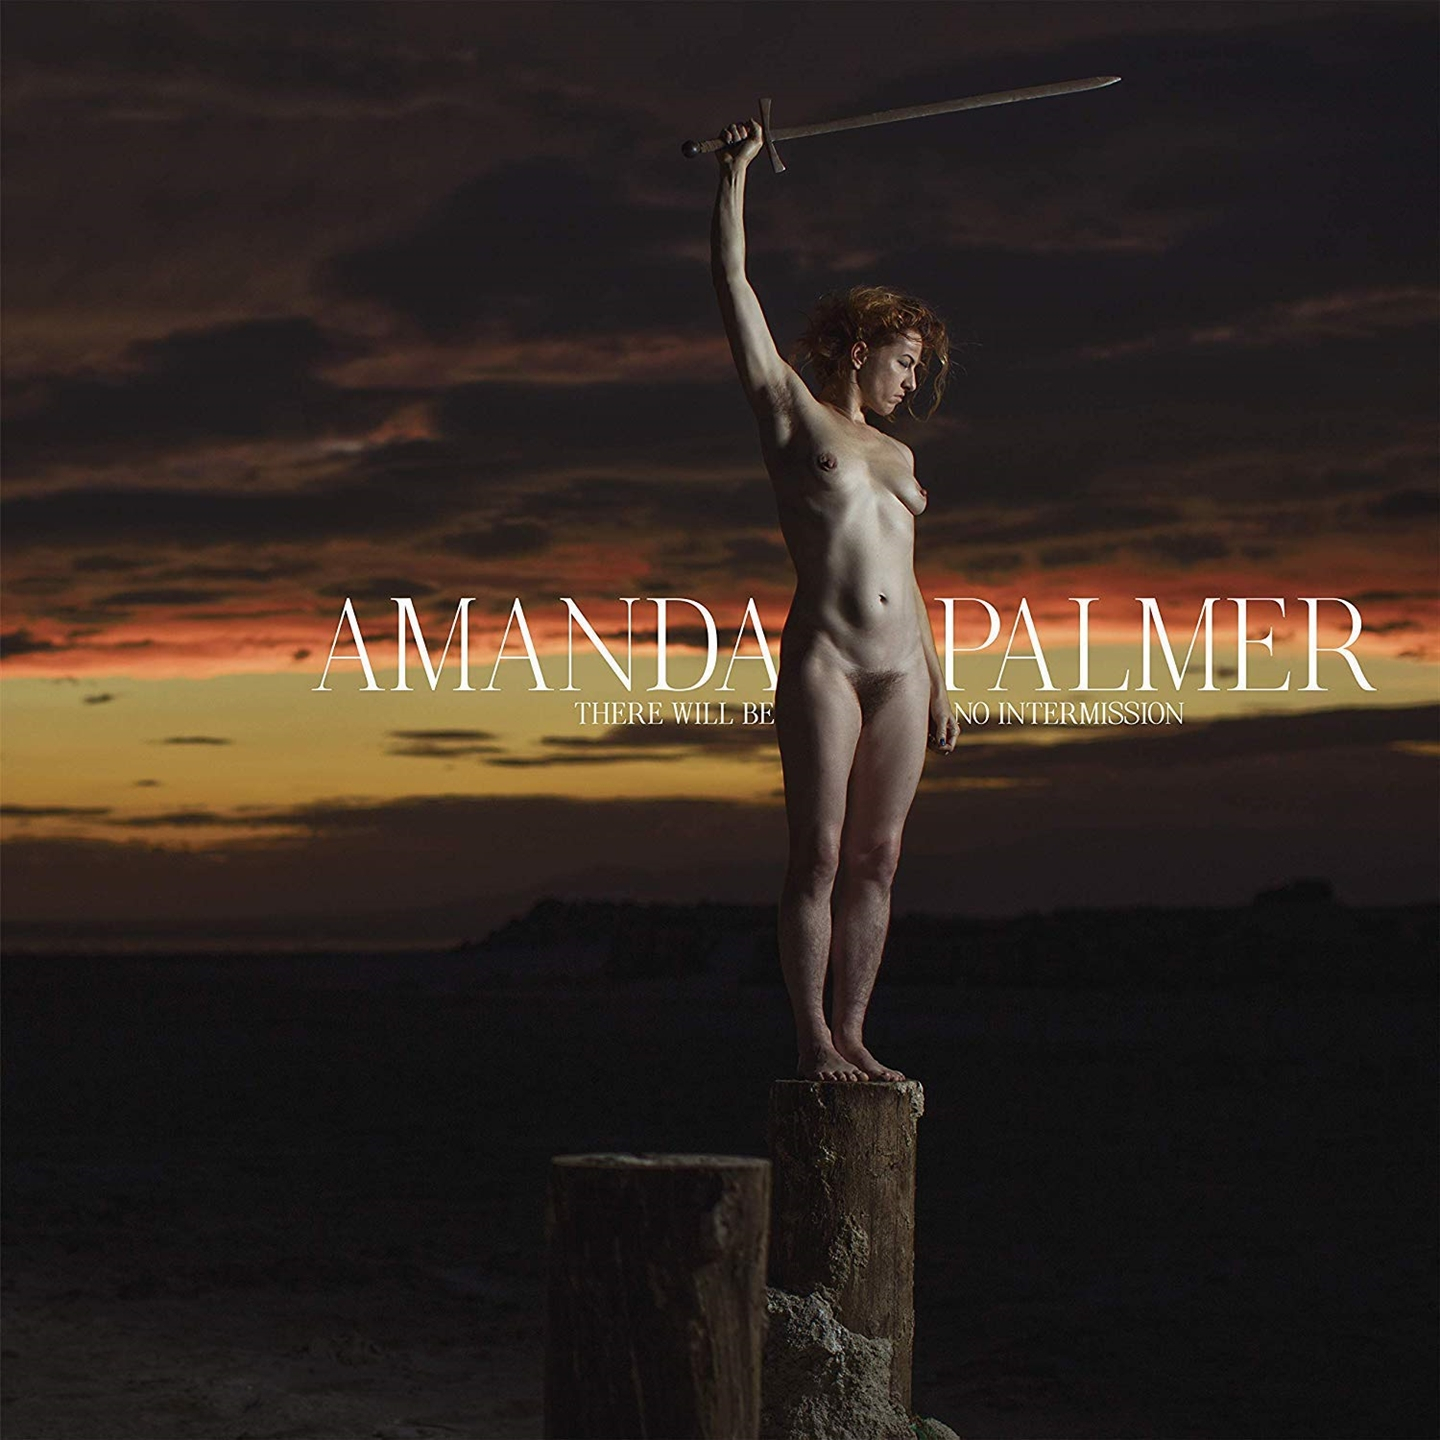 Amanda Palmer - There Will Be No Intermission [Indie Exclusive Ltd.Ed. Lp] - Photo 1 sur 1